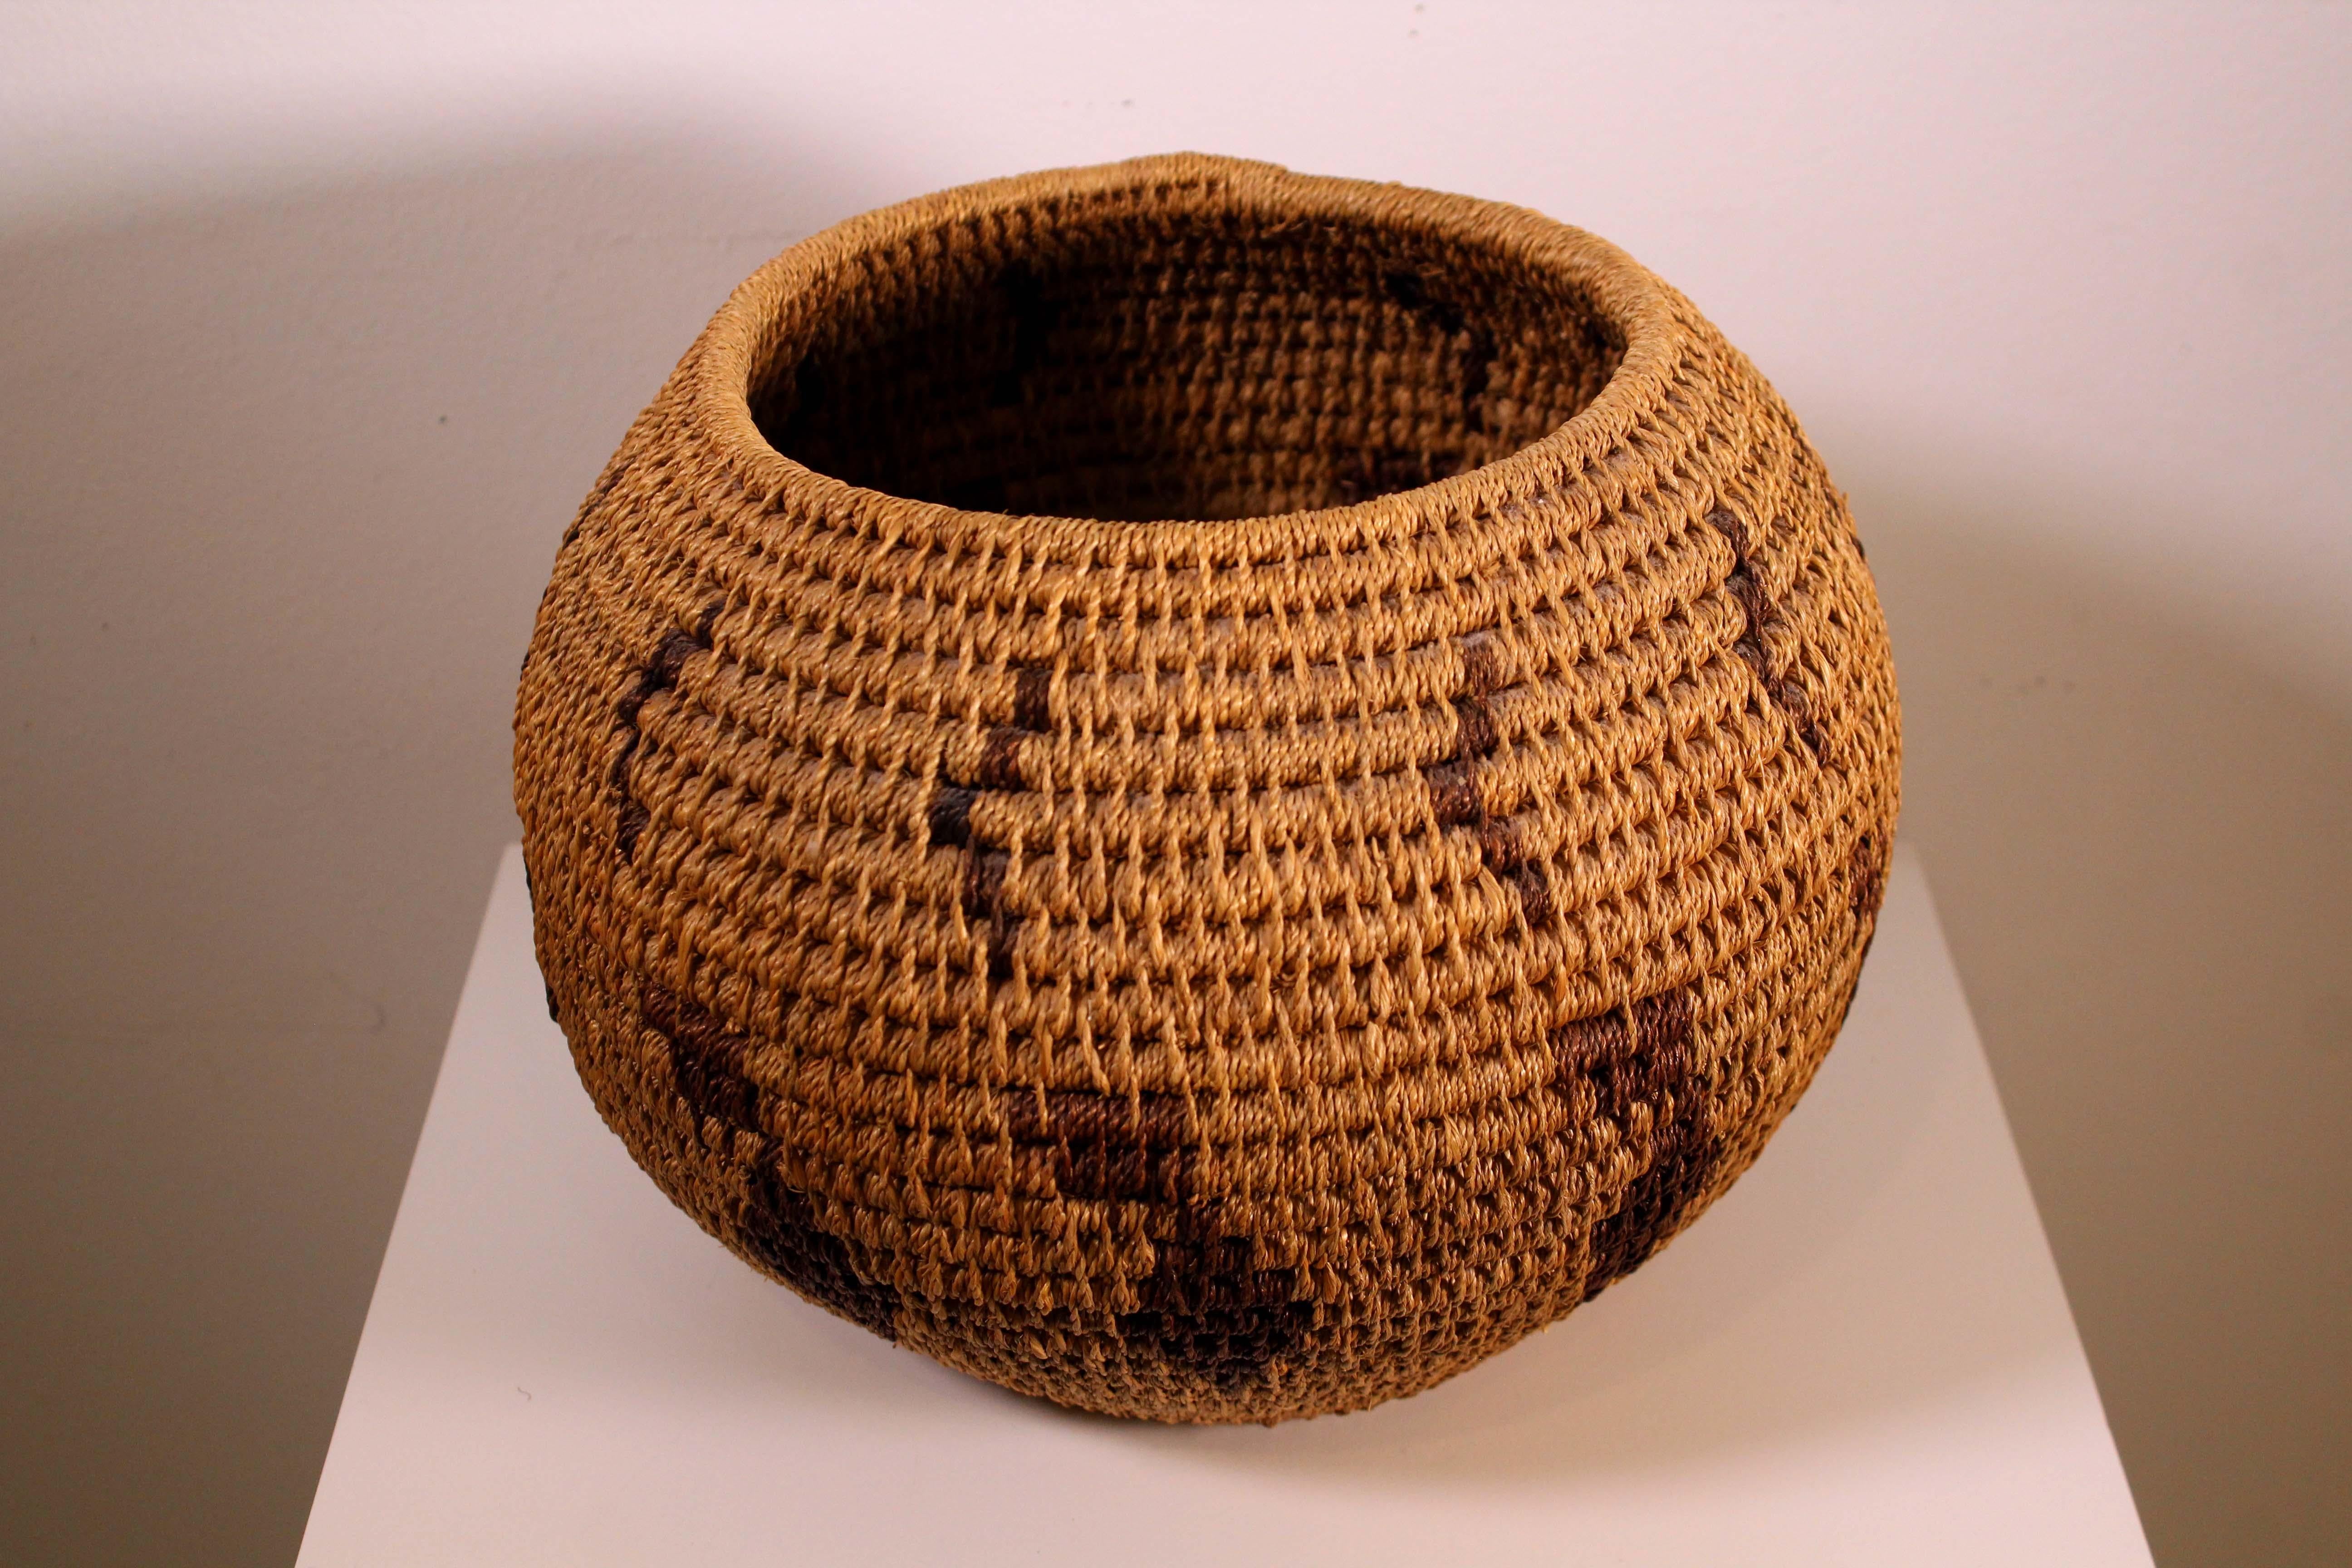 An intricate Hopi Pueblo woven ceremonial basket. Hopi basket weaving has been a part of Native American tradition for hundreds of years ago and the original purpose was solely utilitarian. Then the baskets were created for ceremonial life and in